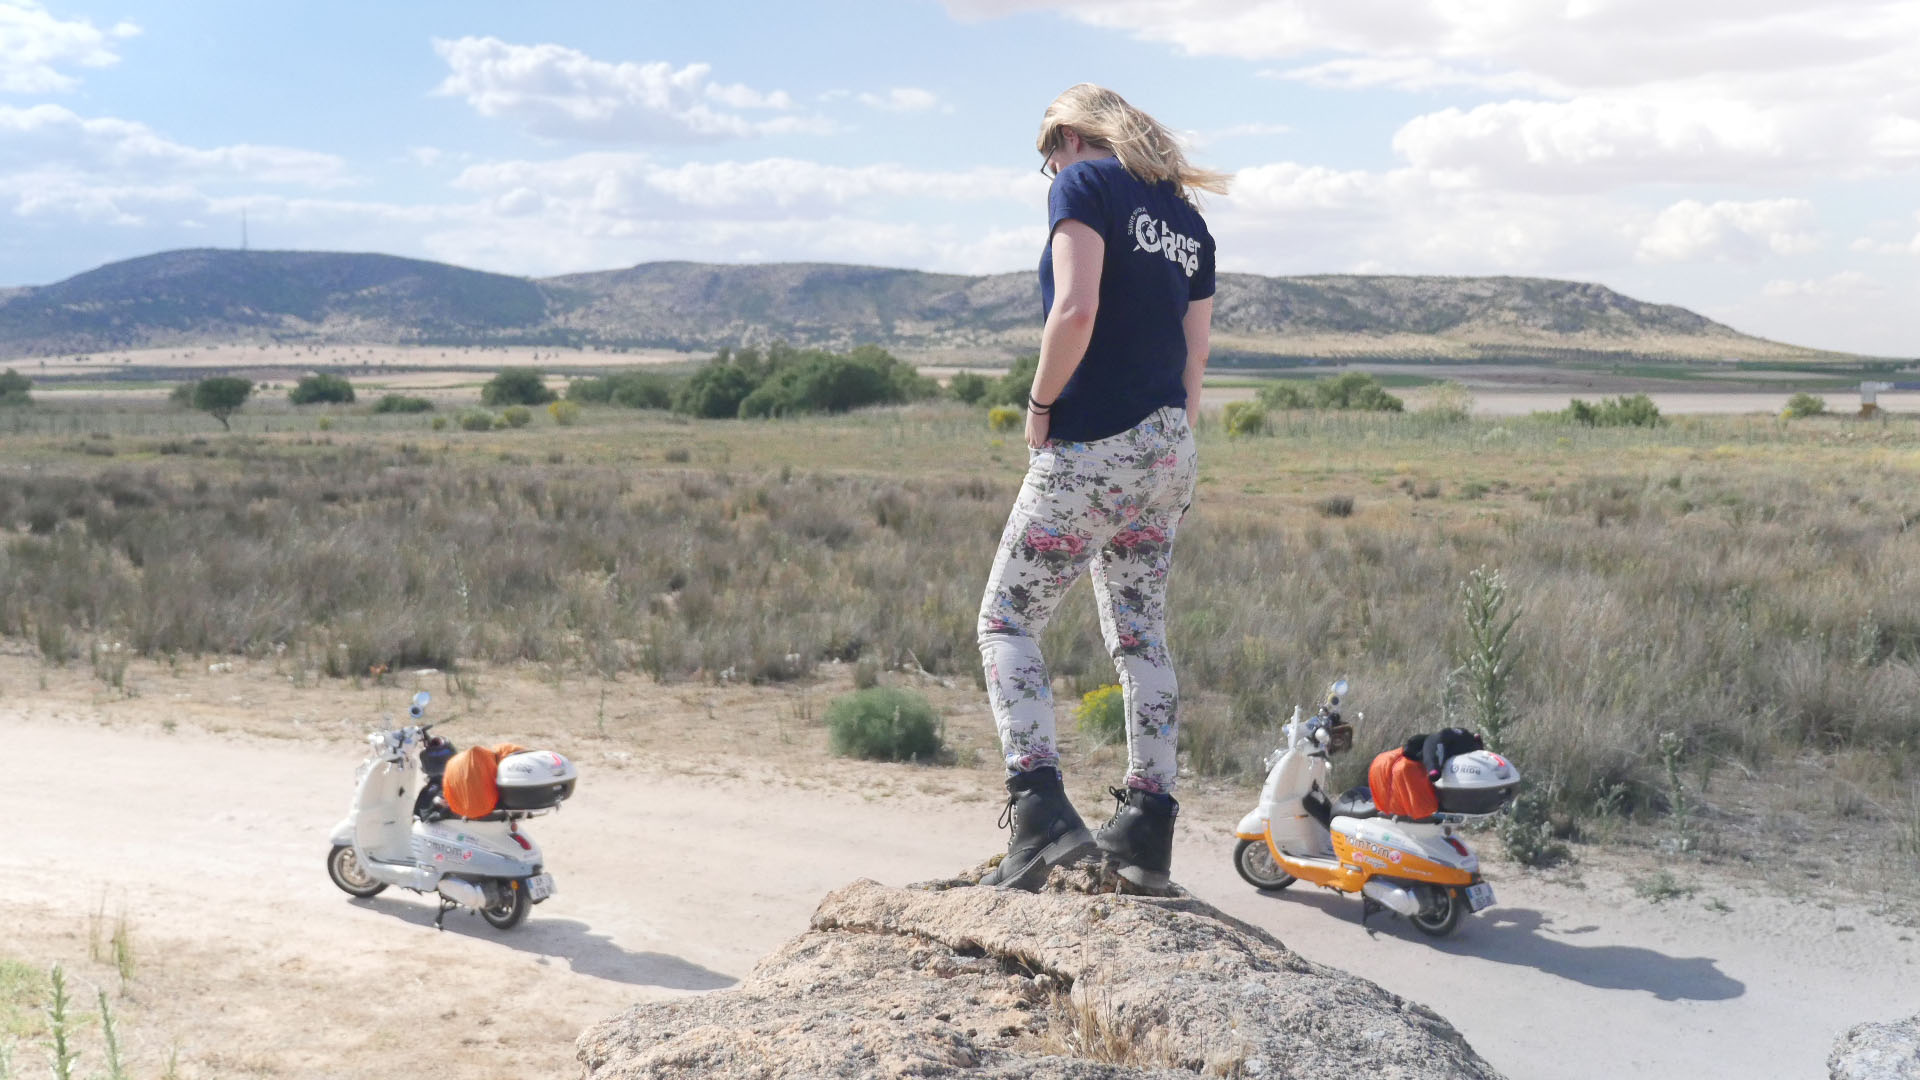 During their 49-day road-trip, Clémence and Lisa had the chance to cross with their scooter Django the desert of Bardenas. One of the most memorable stages of their journey of more than 4000 km.